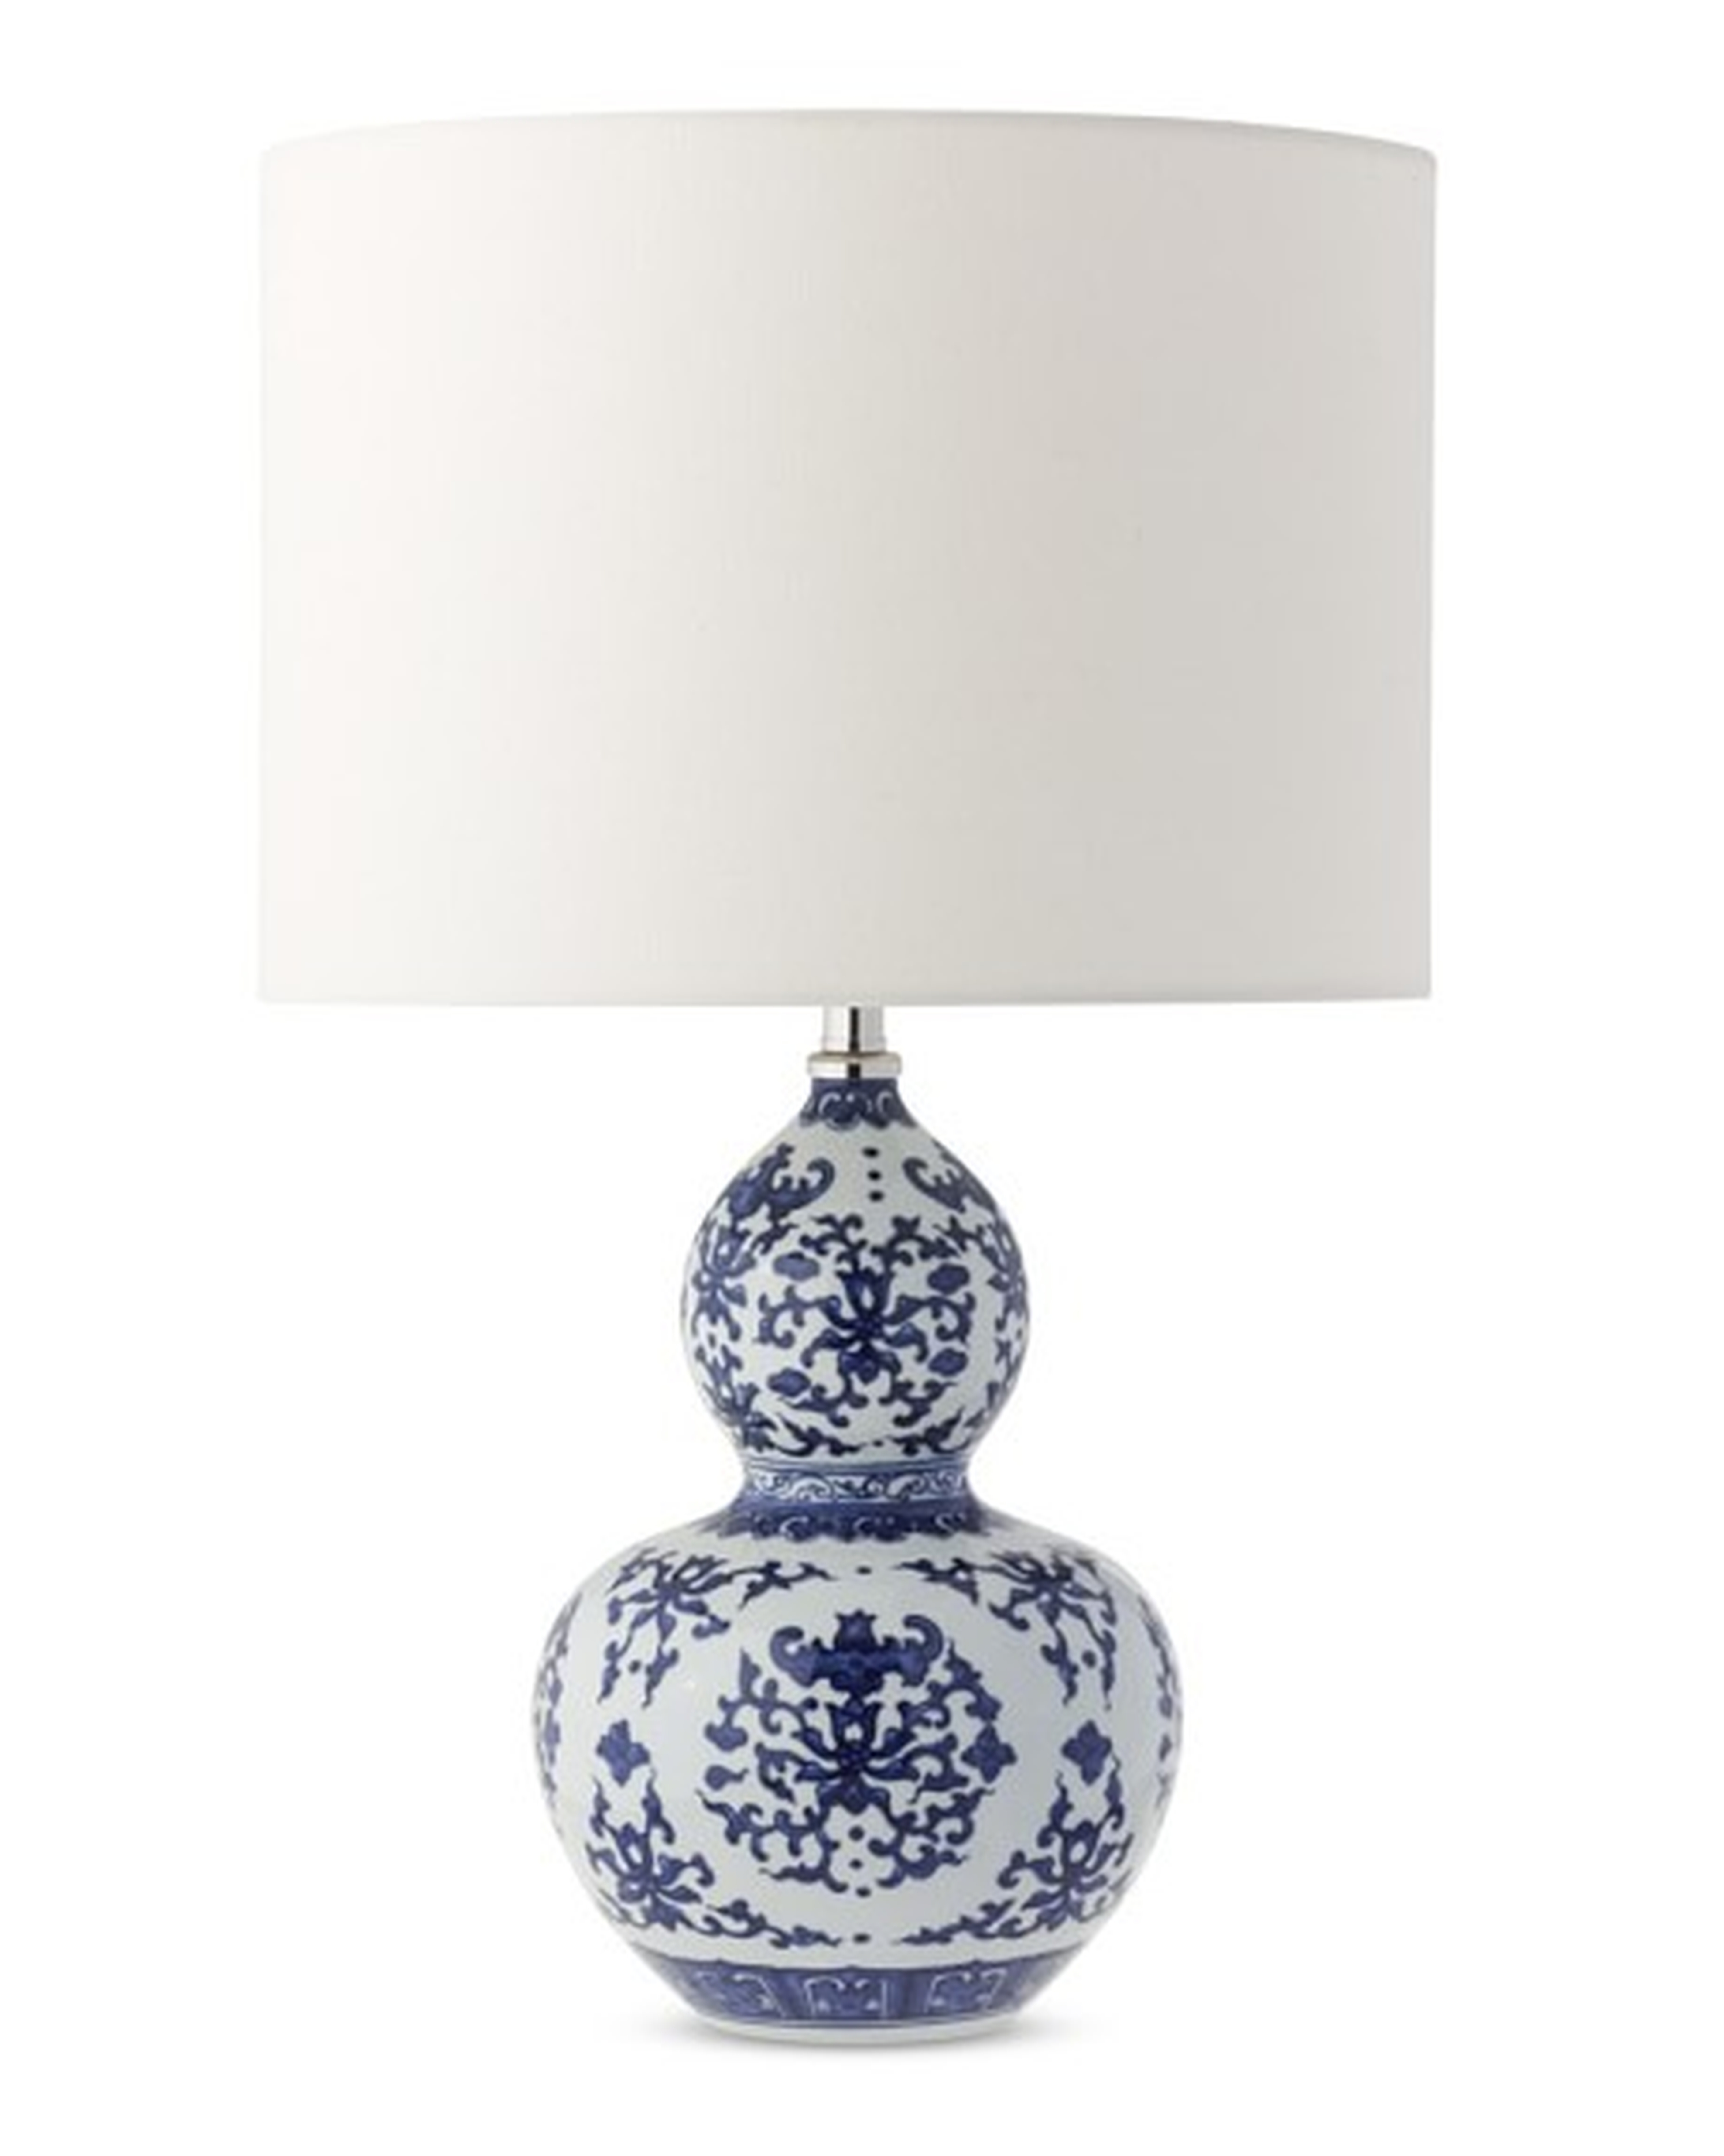 Gourd Ginger Jar Table Lamp, Blue and White - Single - Williams Sonoma Home